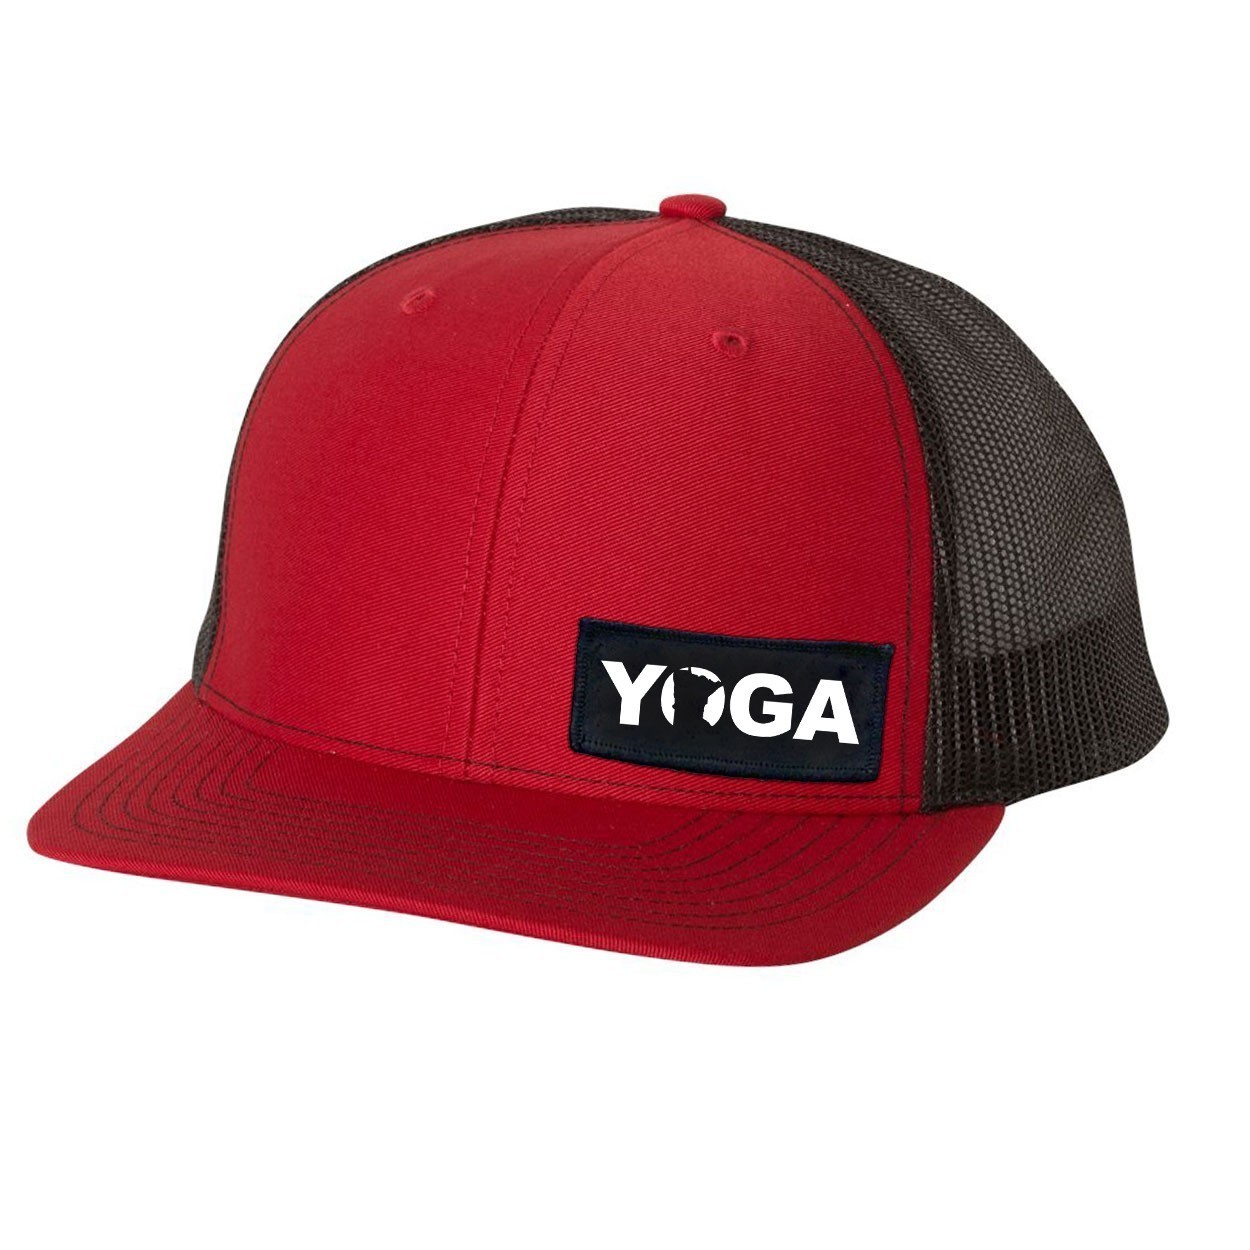 Yoga Minnesota Night Out Woven Patch Snapback Trucker Hat Red/Black (White Logo)